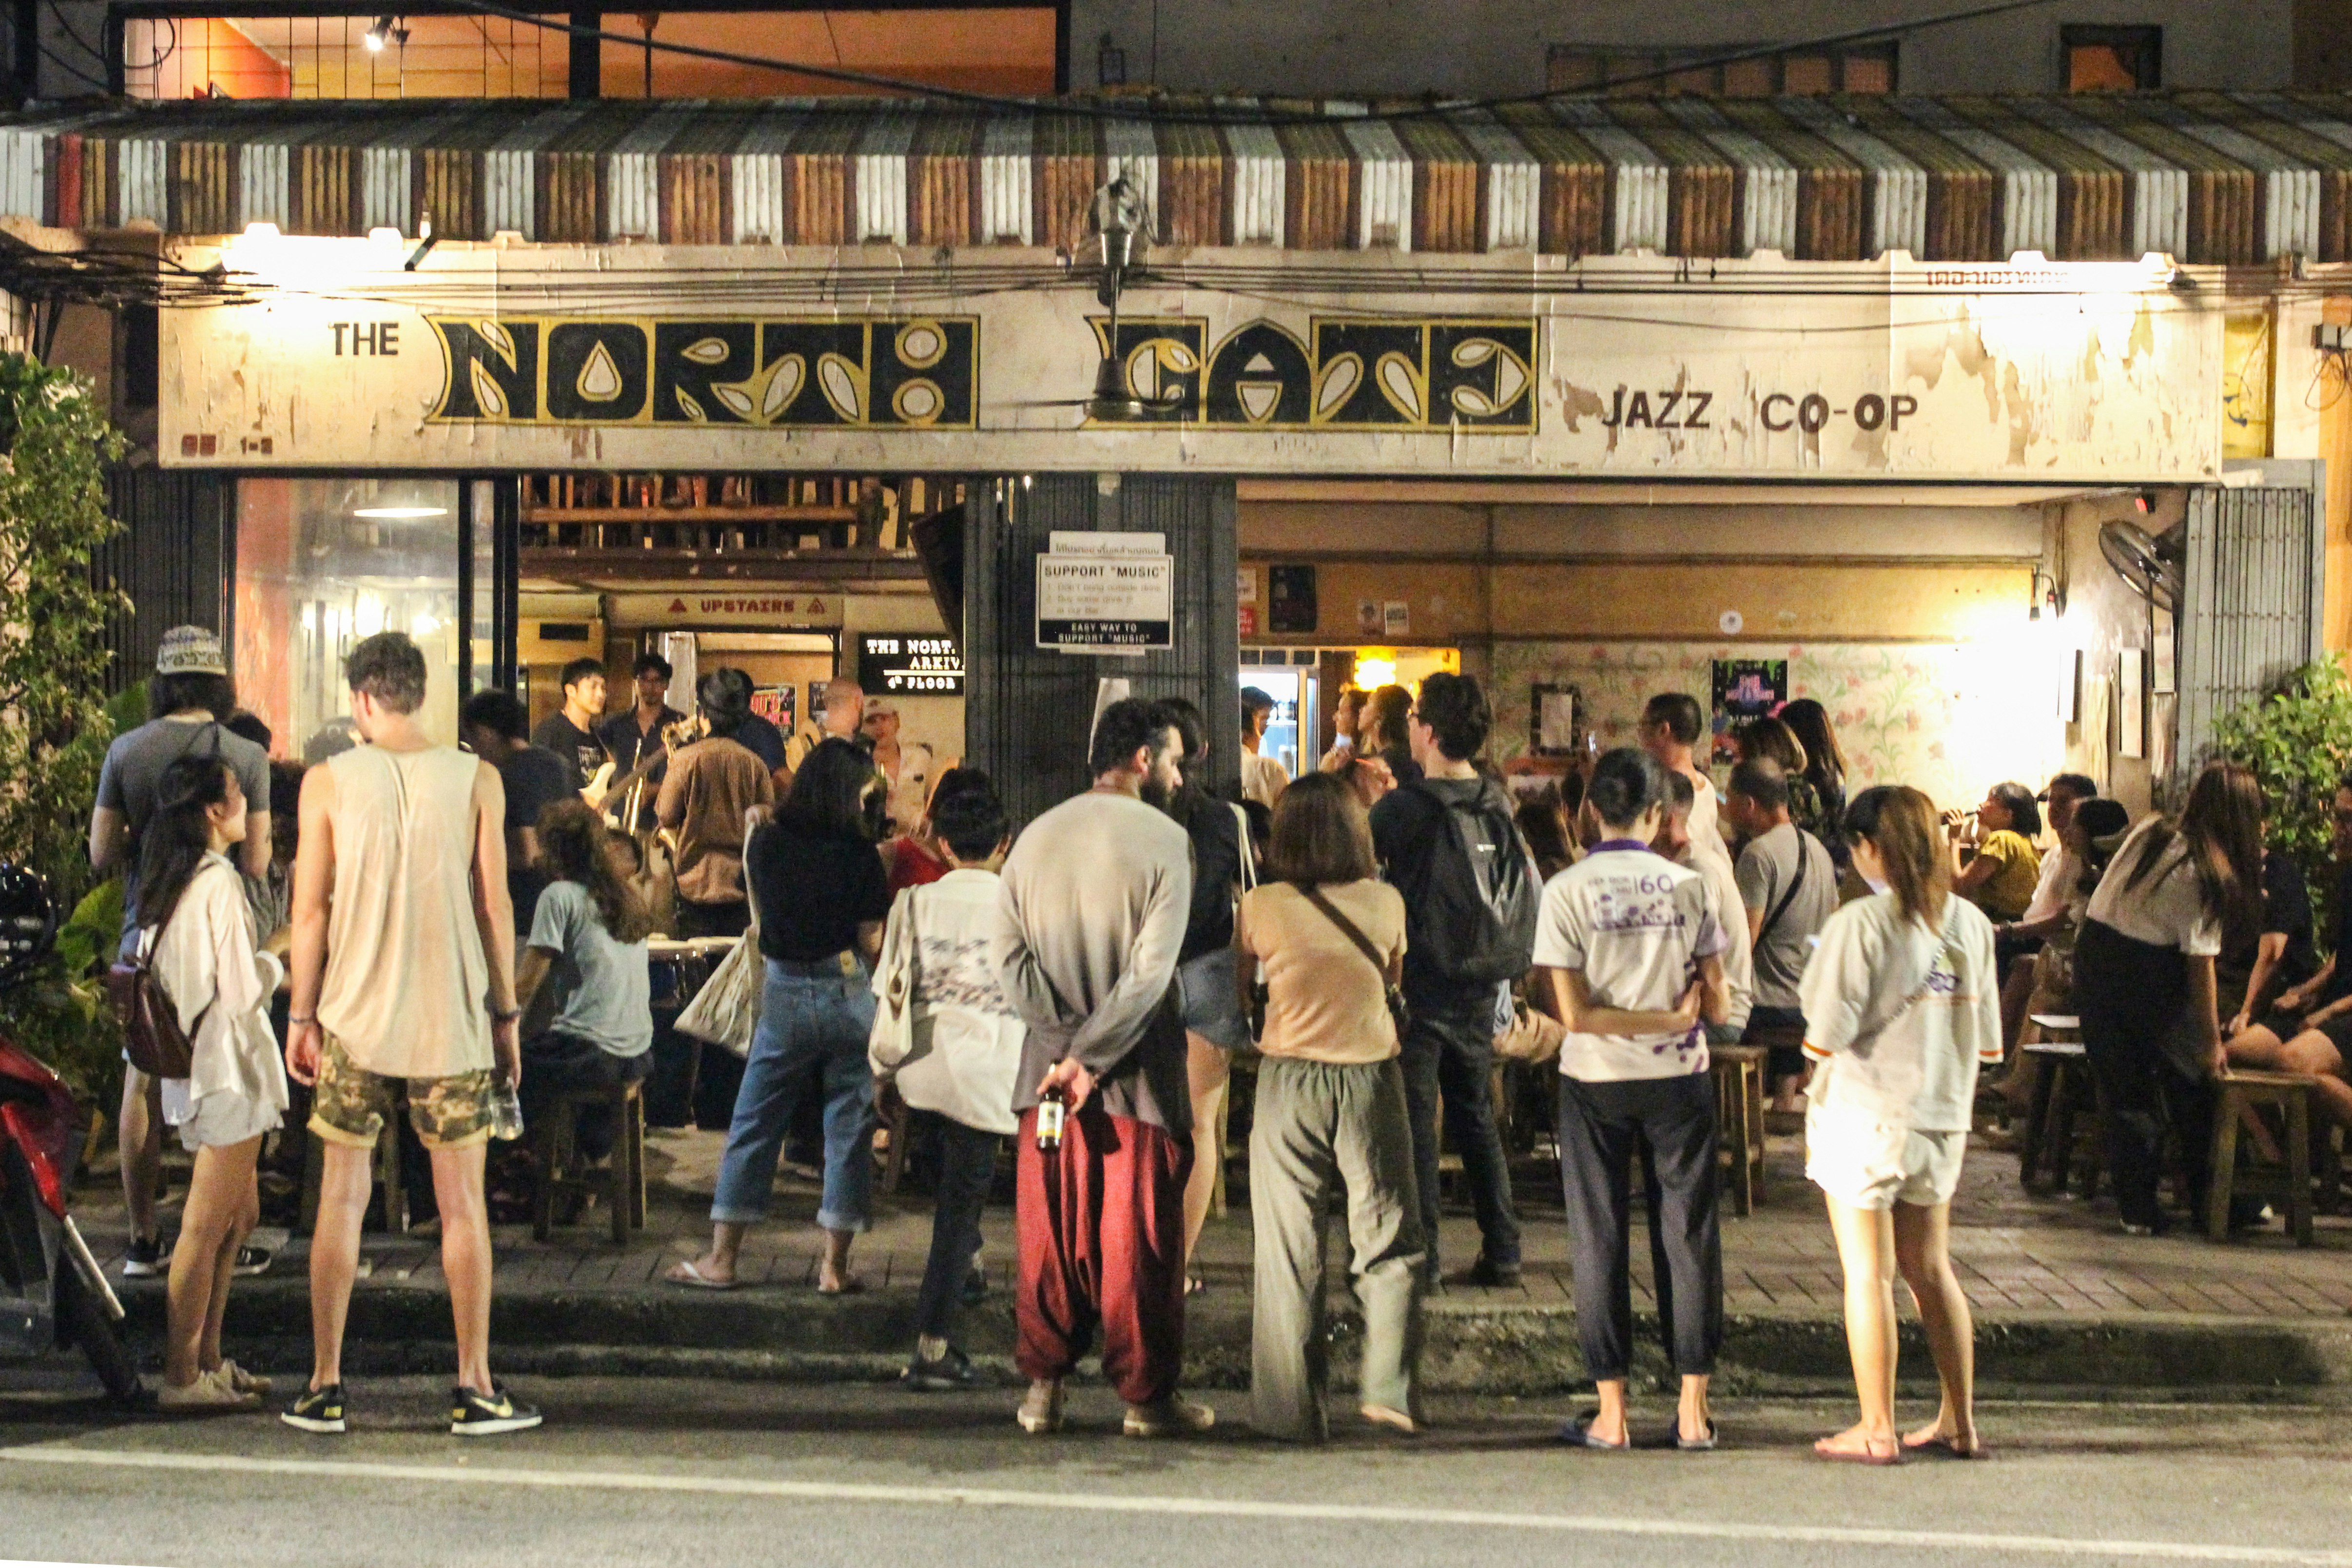 A large crowd of people gather at the North Jazz Co-Op bar to hear live music. The crowds spill from the inside of the bar onto the pavement outside.